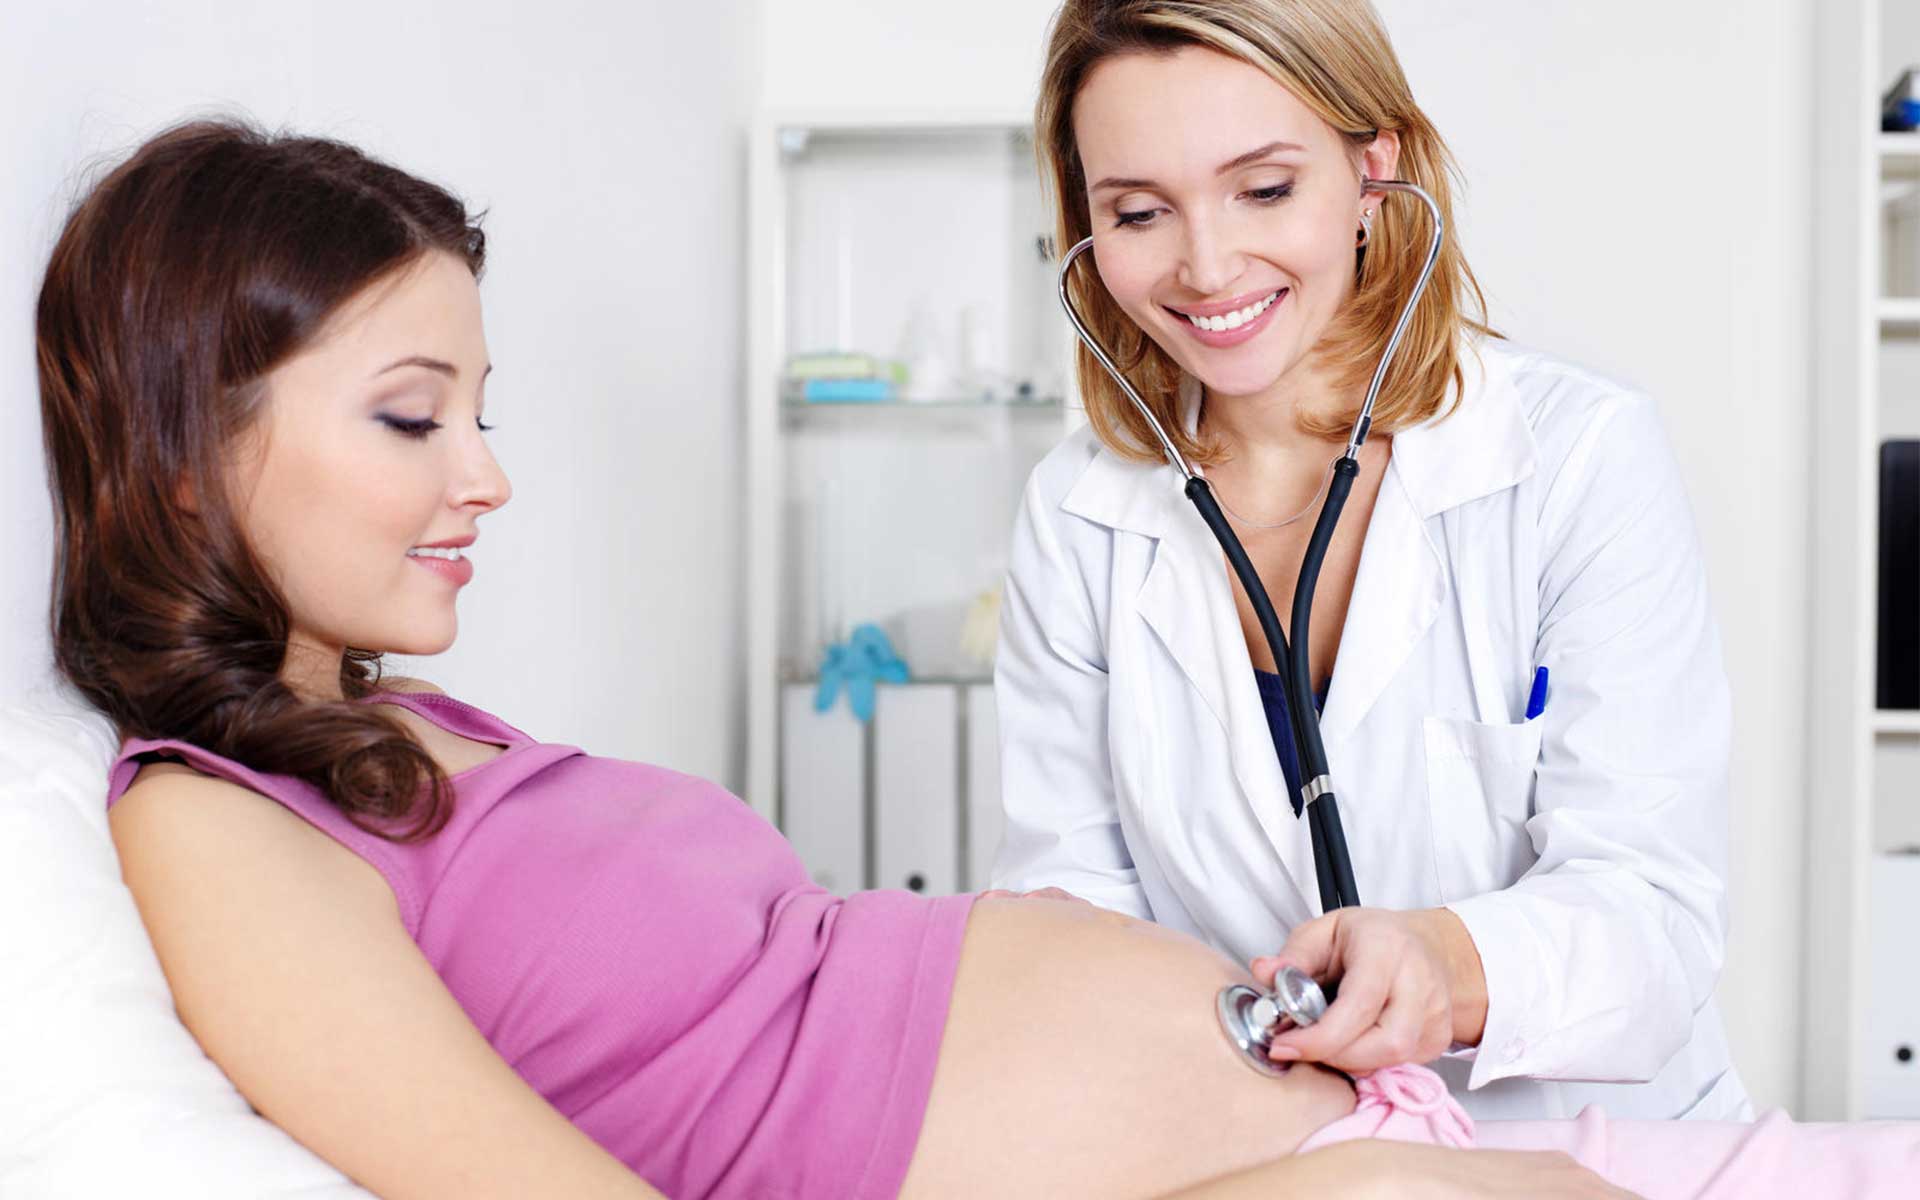 Pregnant Woman and Doctor